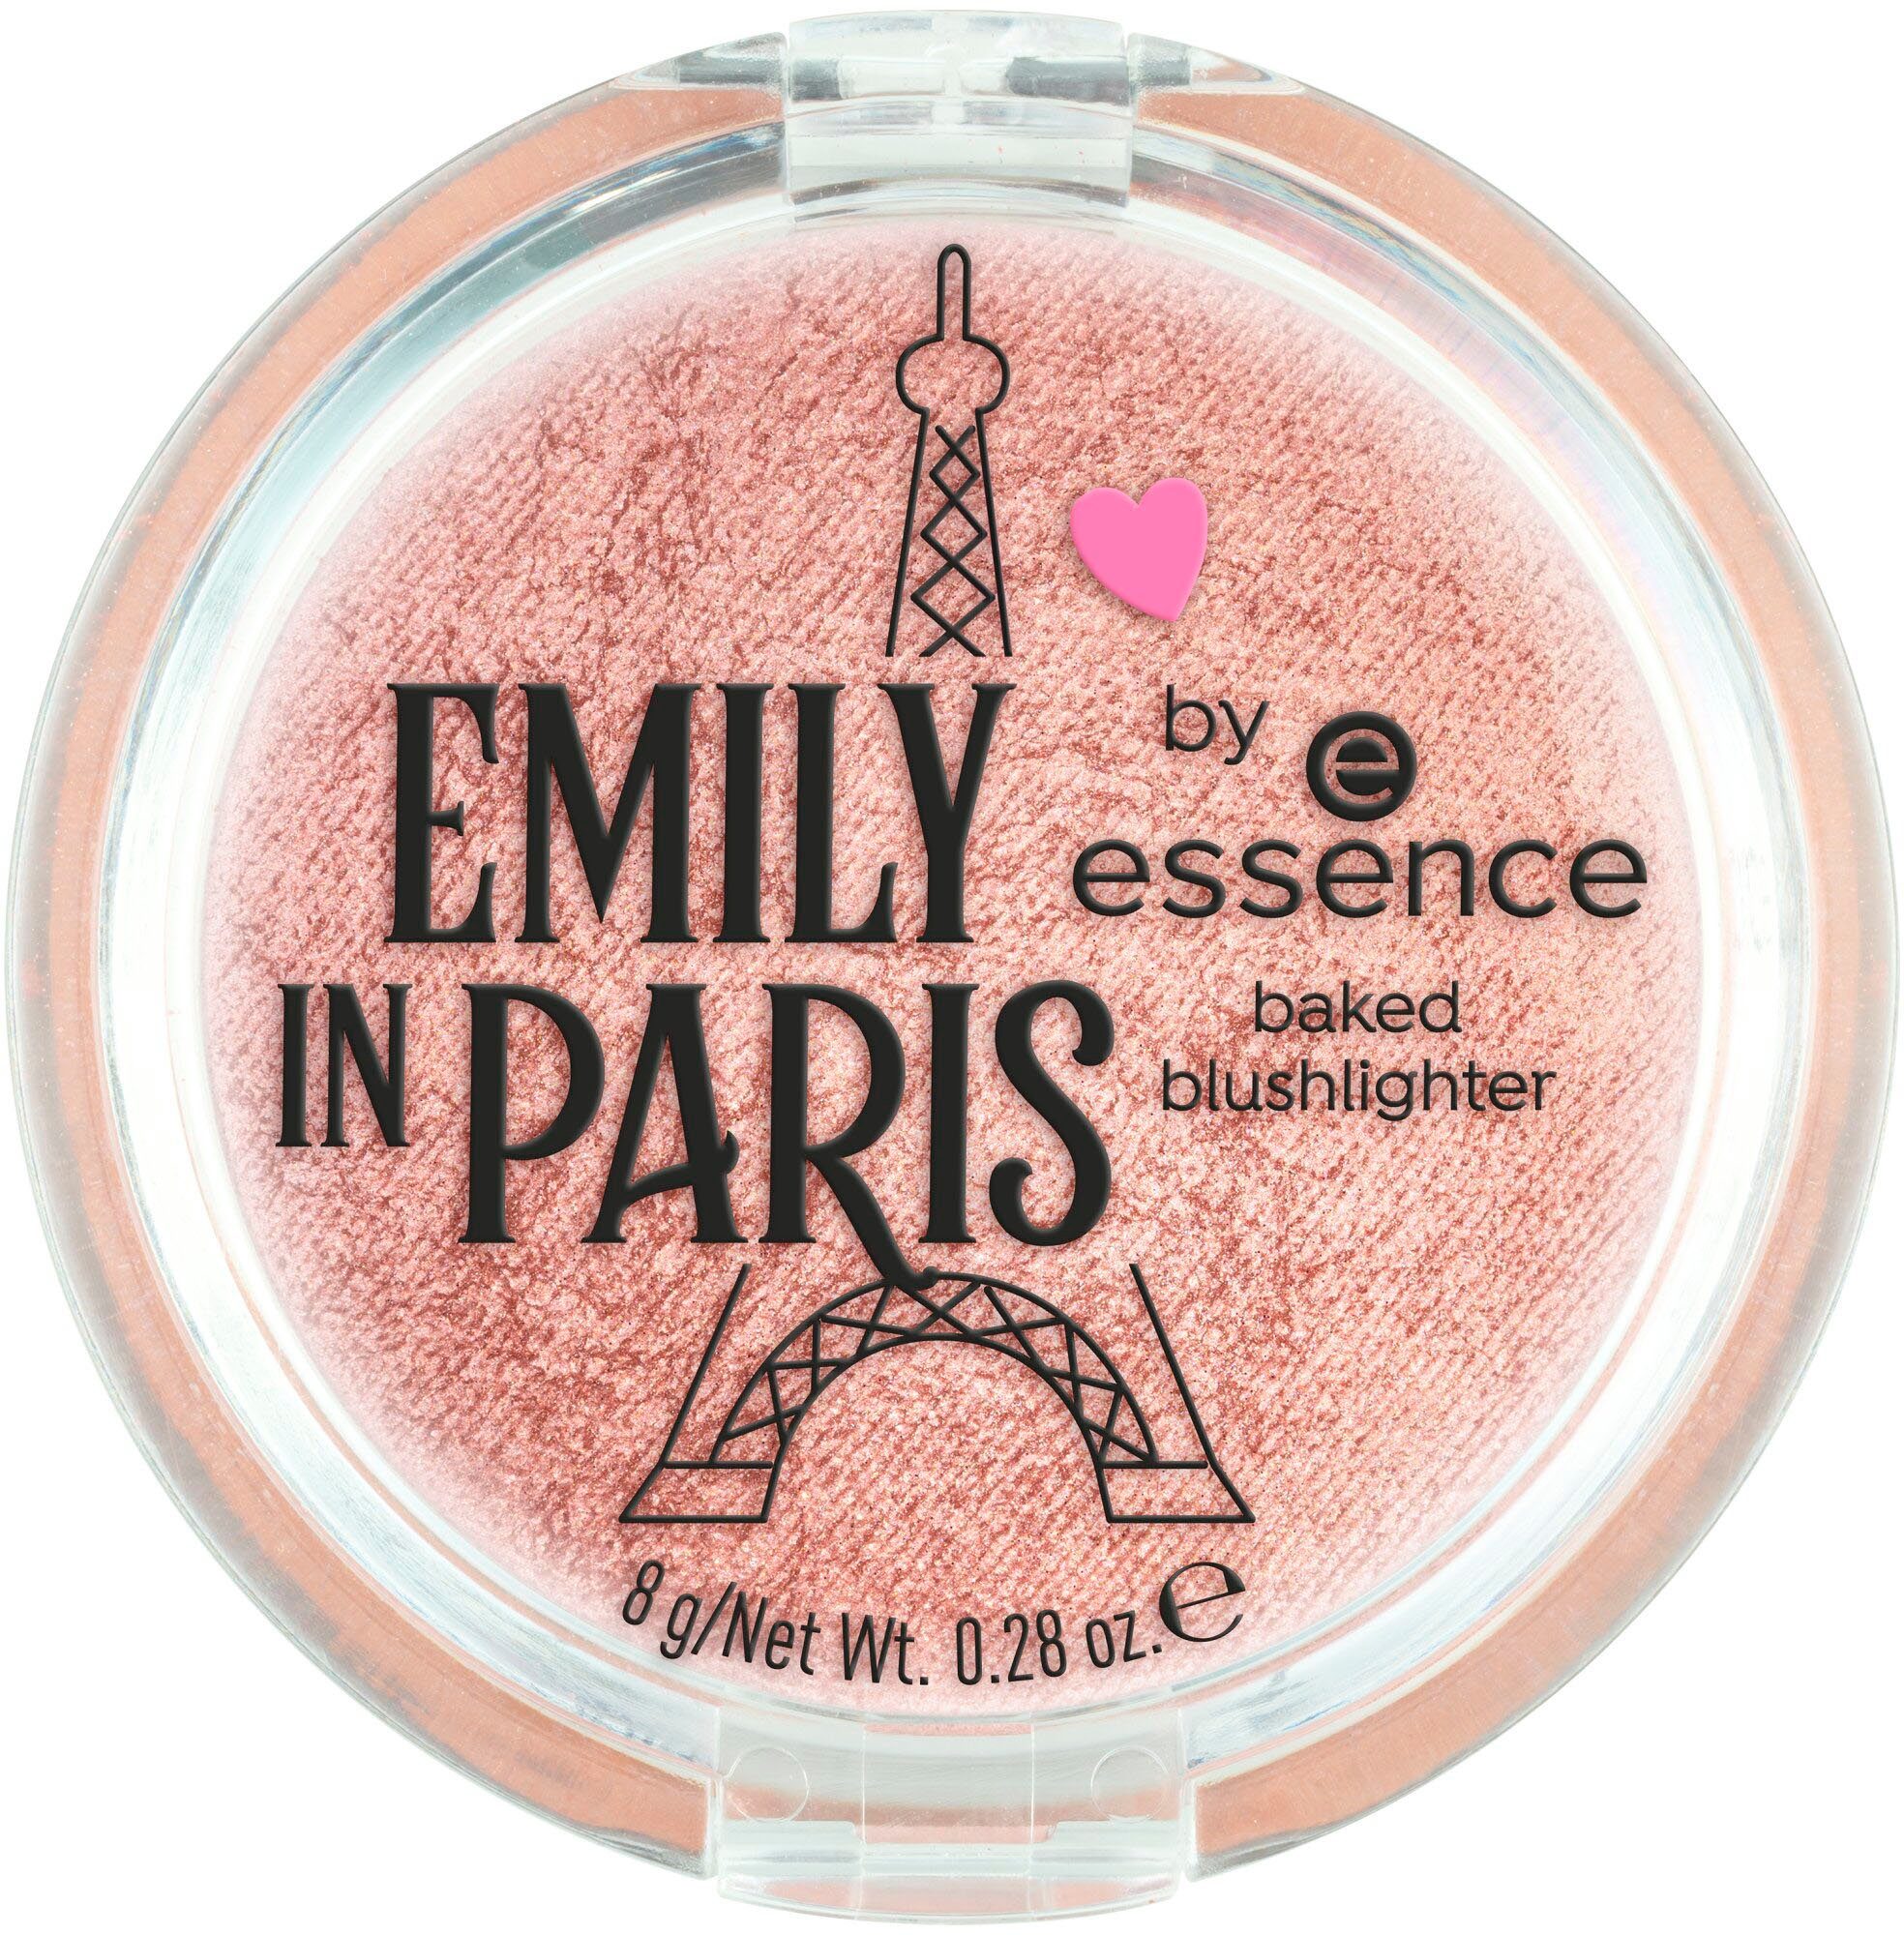 Essence Rouge essence blushlighter PARIS IN baked by EMILY